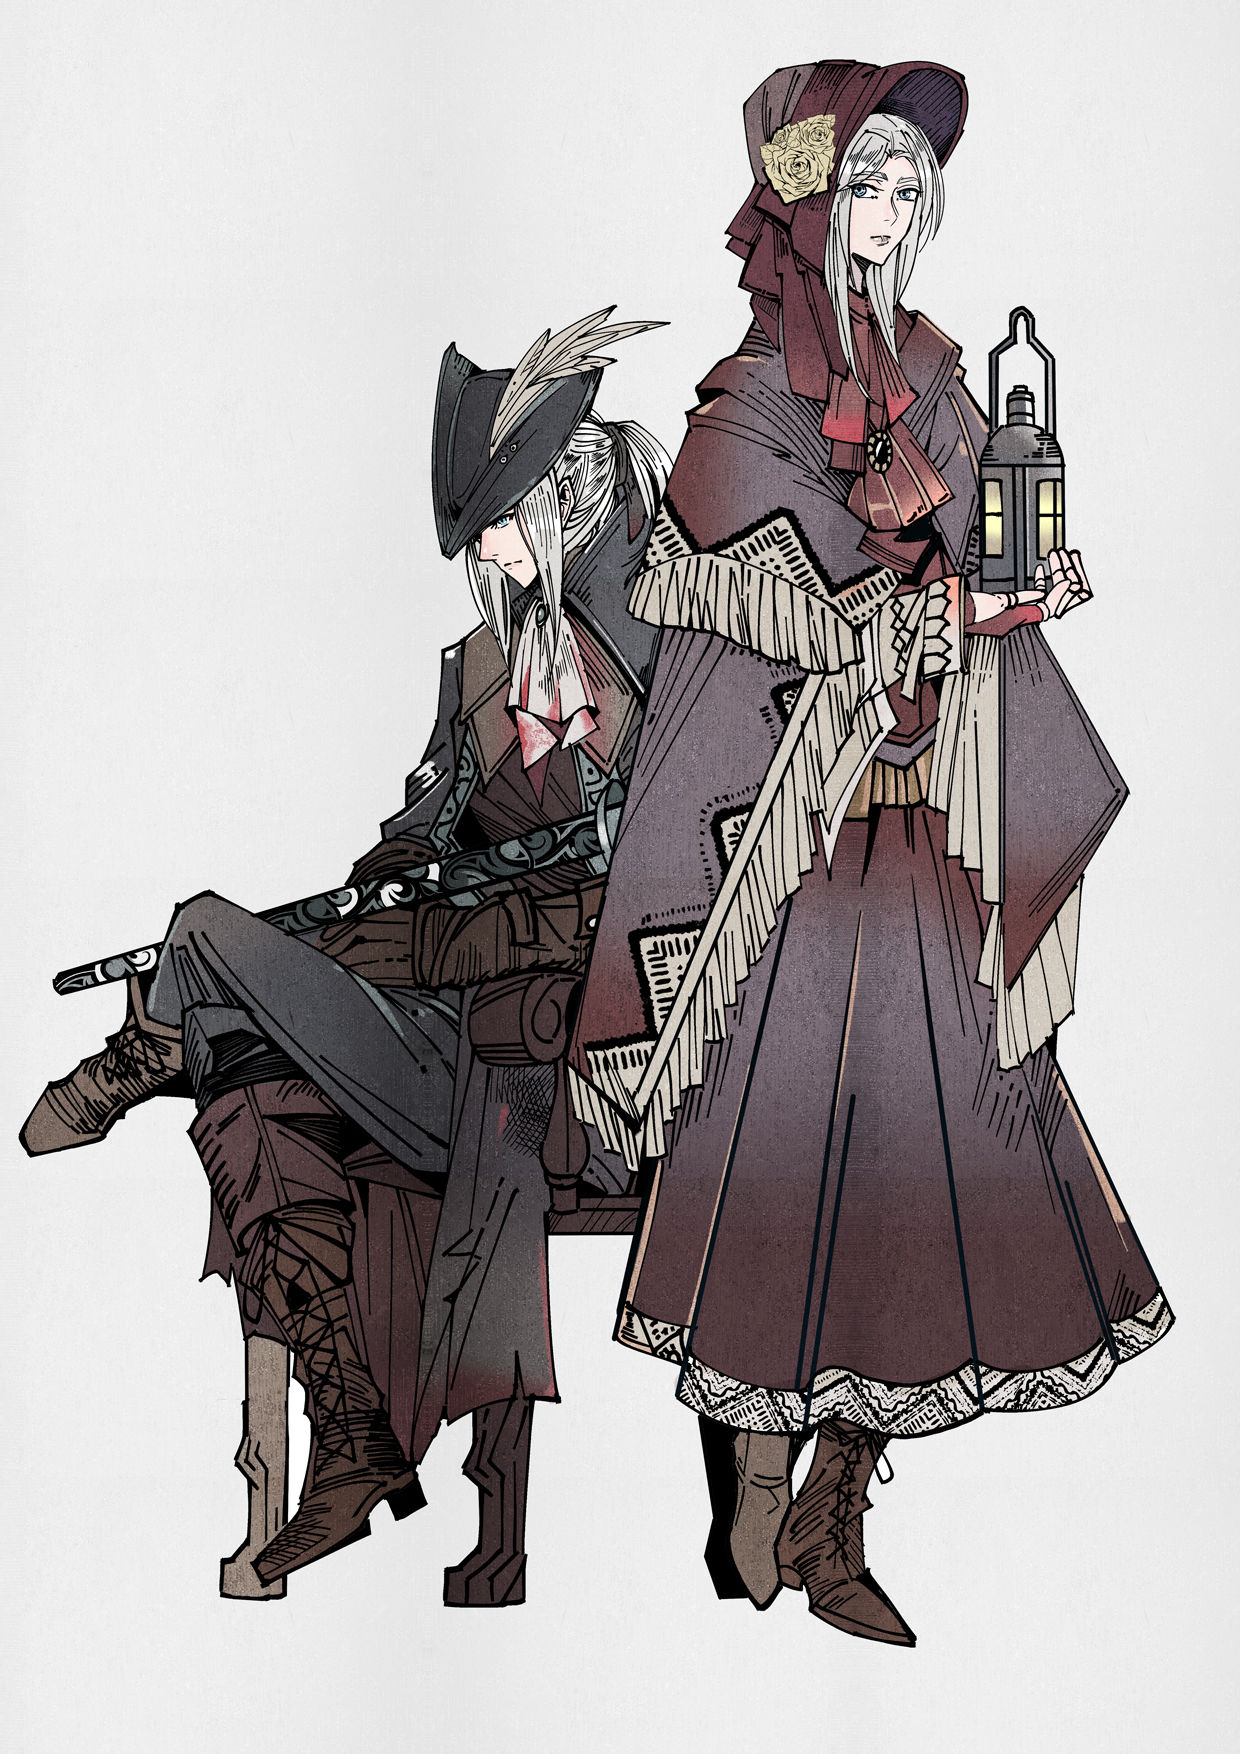 Doll & Lady Maria of the Astral插画图片壁纸